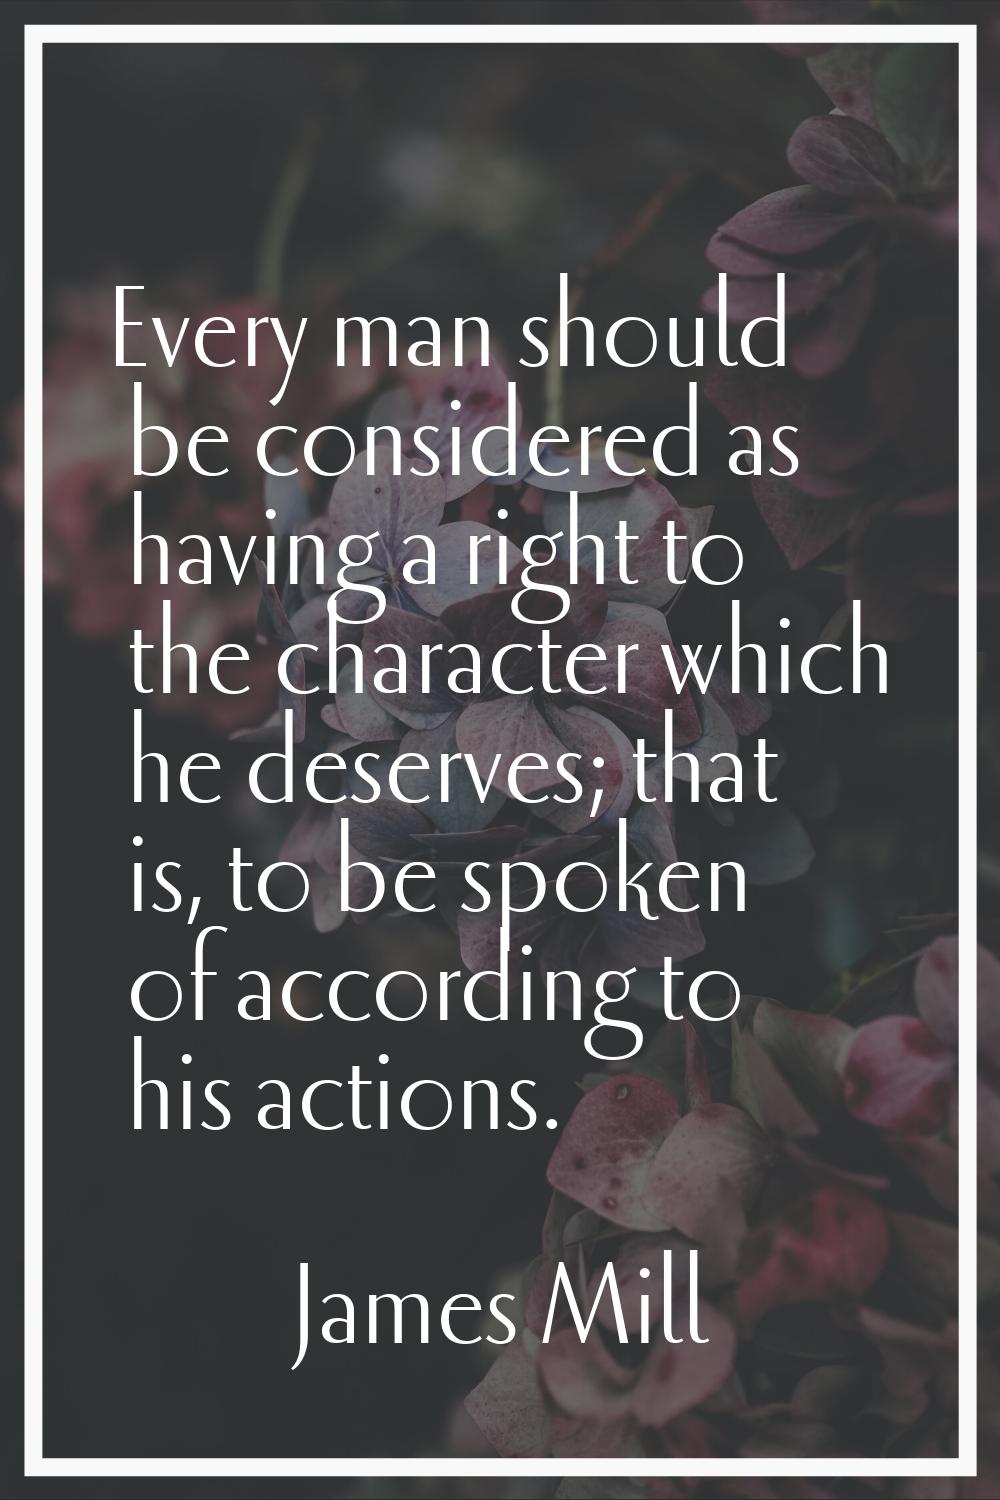 Every man should be considered as having a right to the character which he deserves; that is, to be